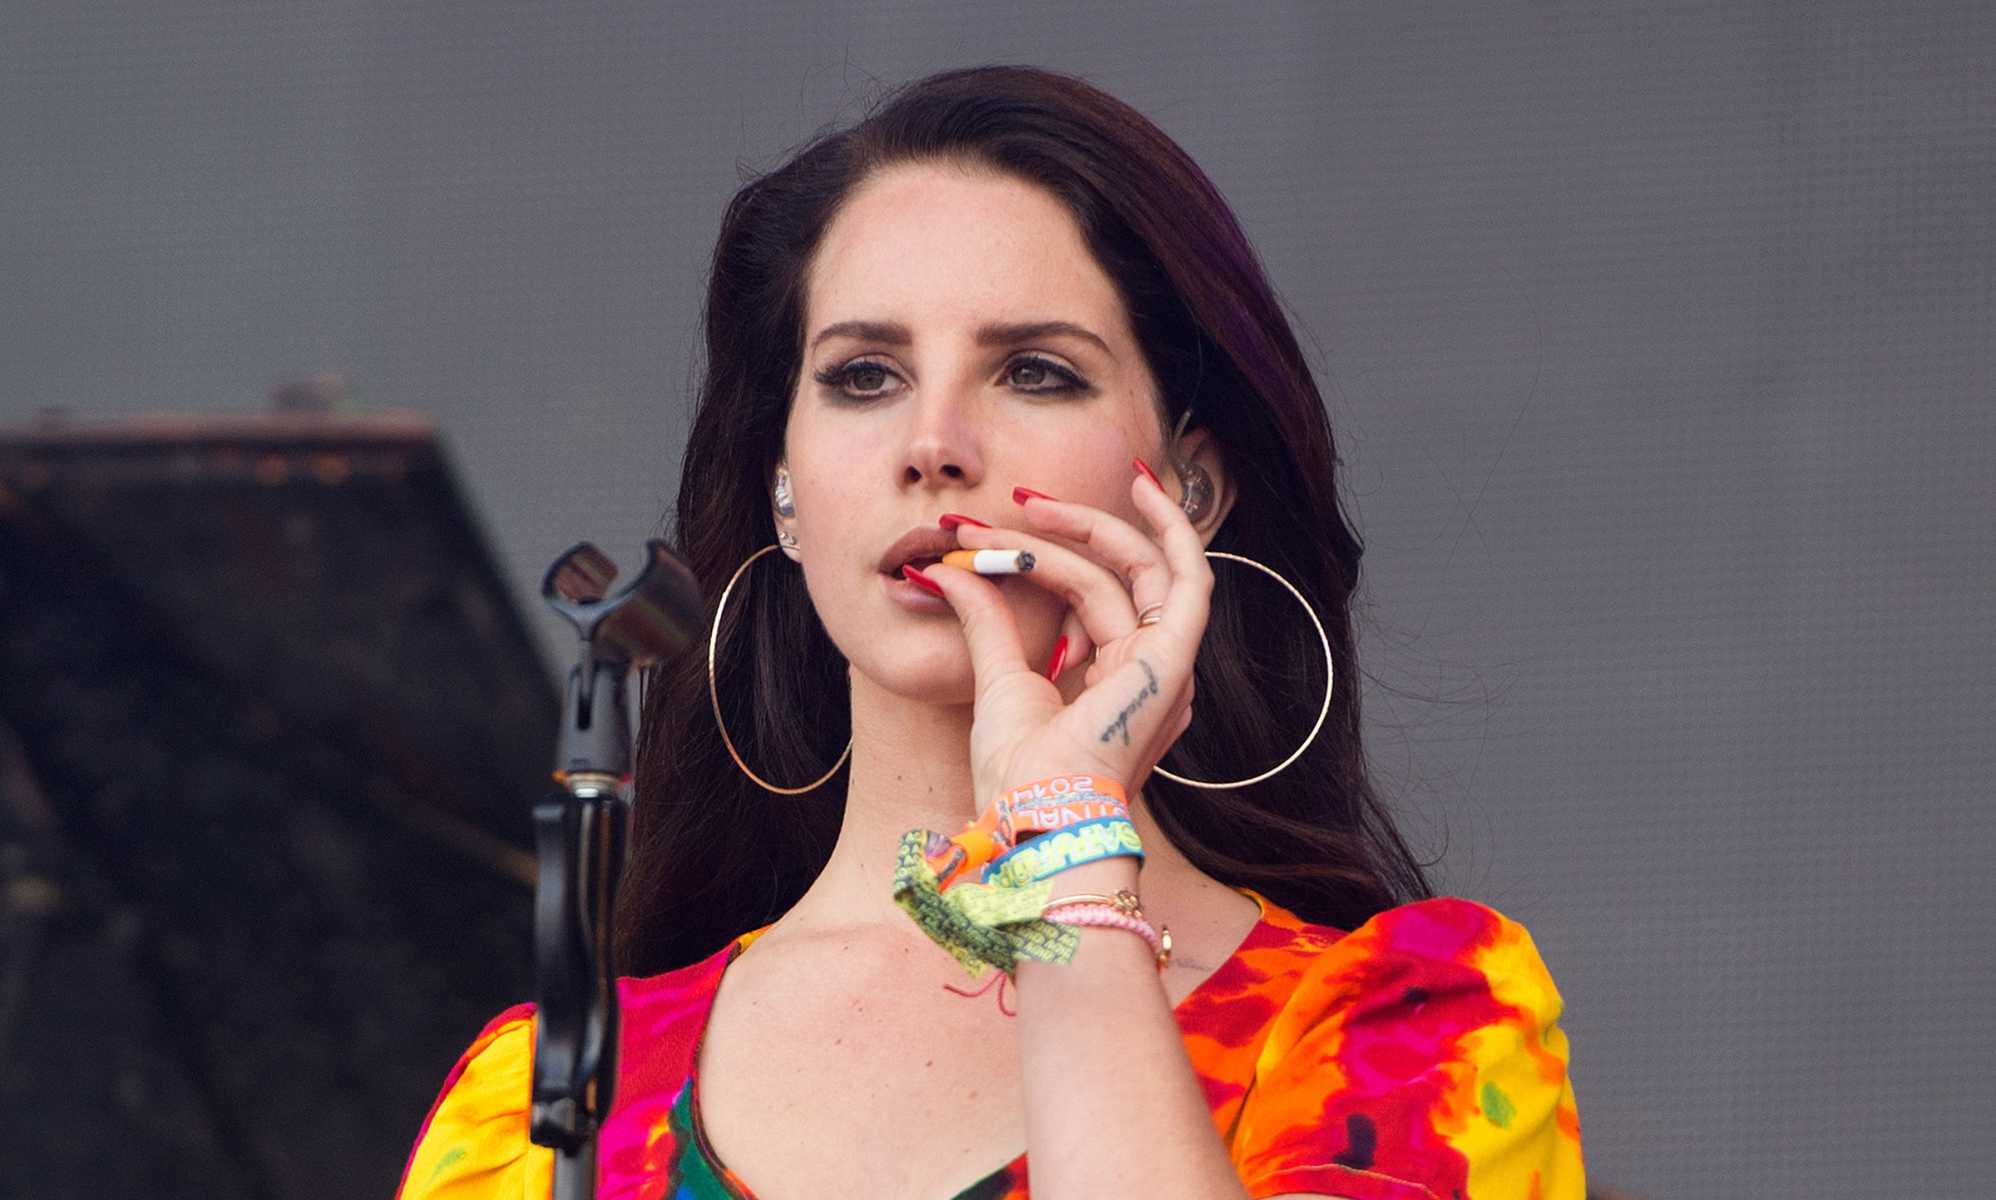 Lana Del Rey Grammy win music star loses out to Billie Eilish